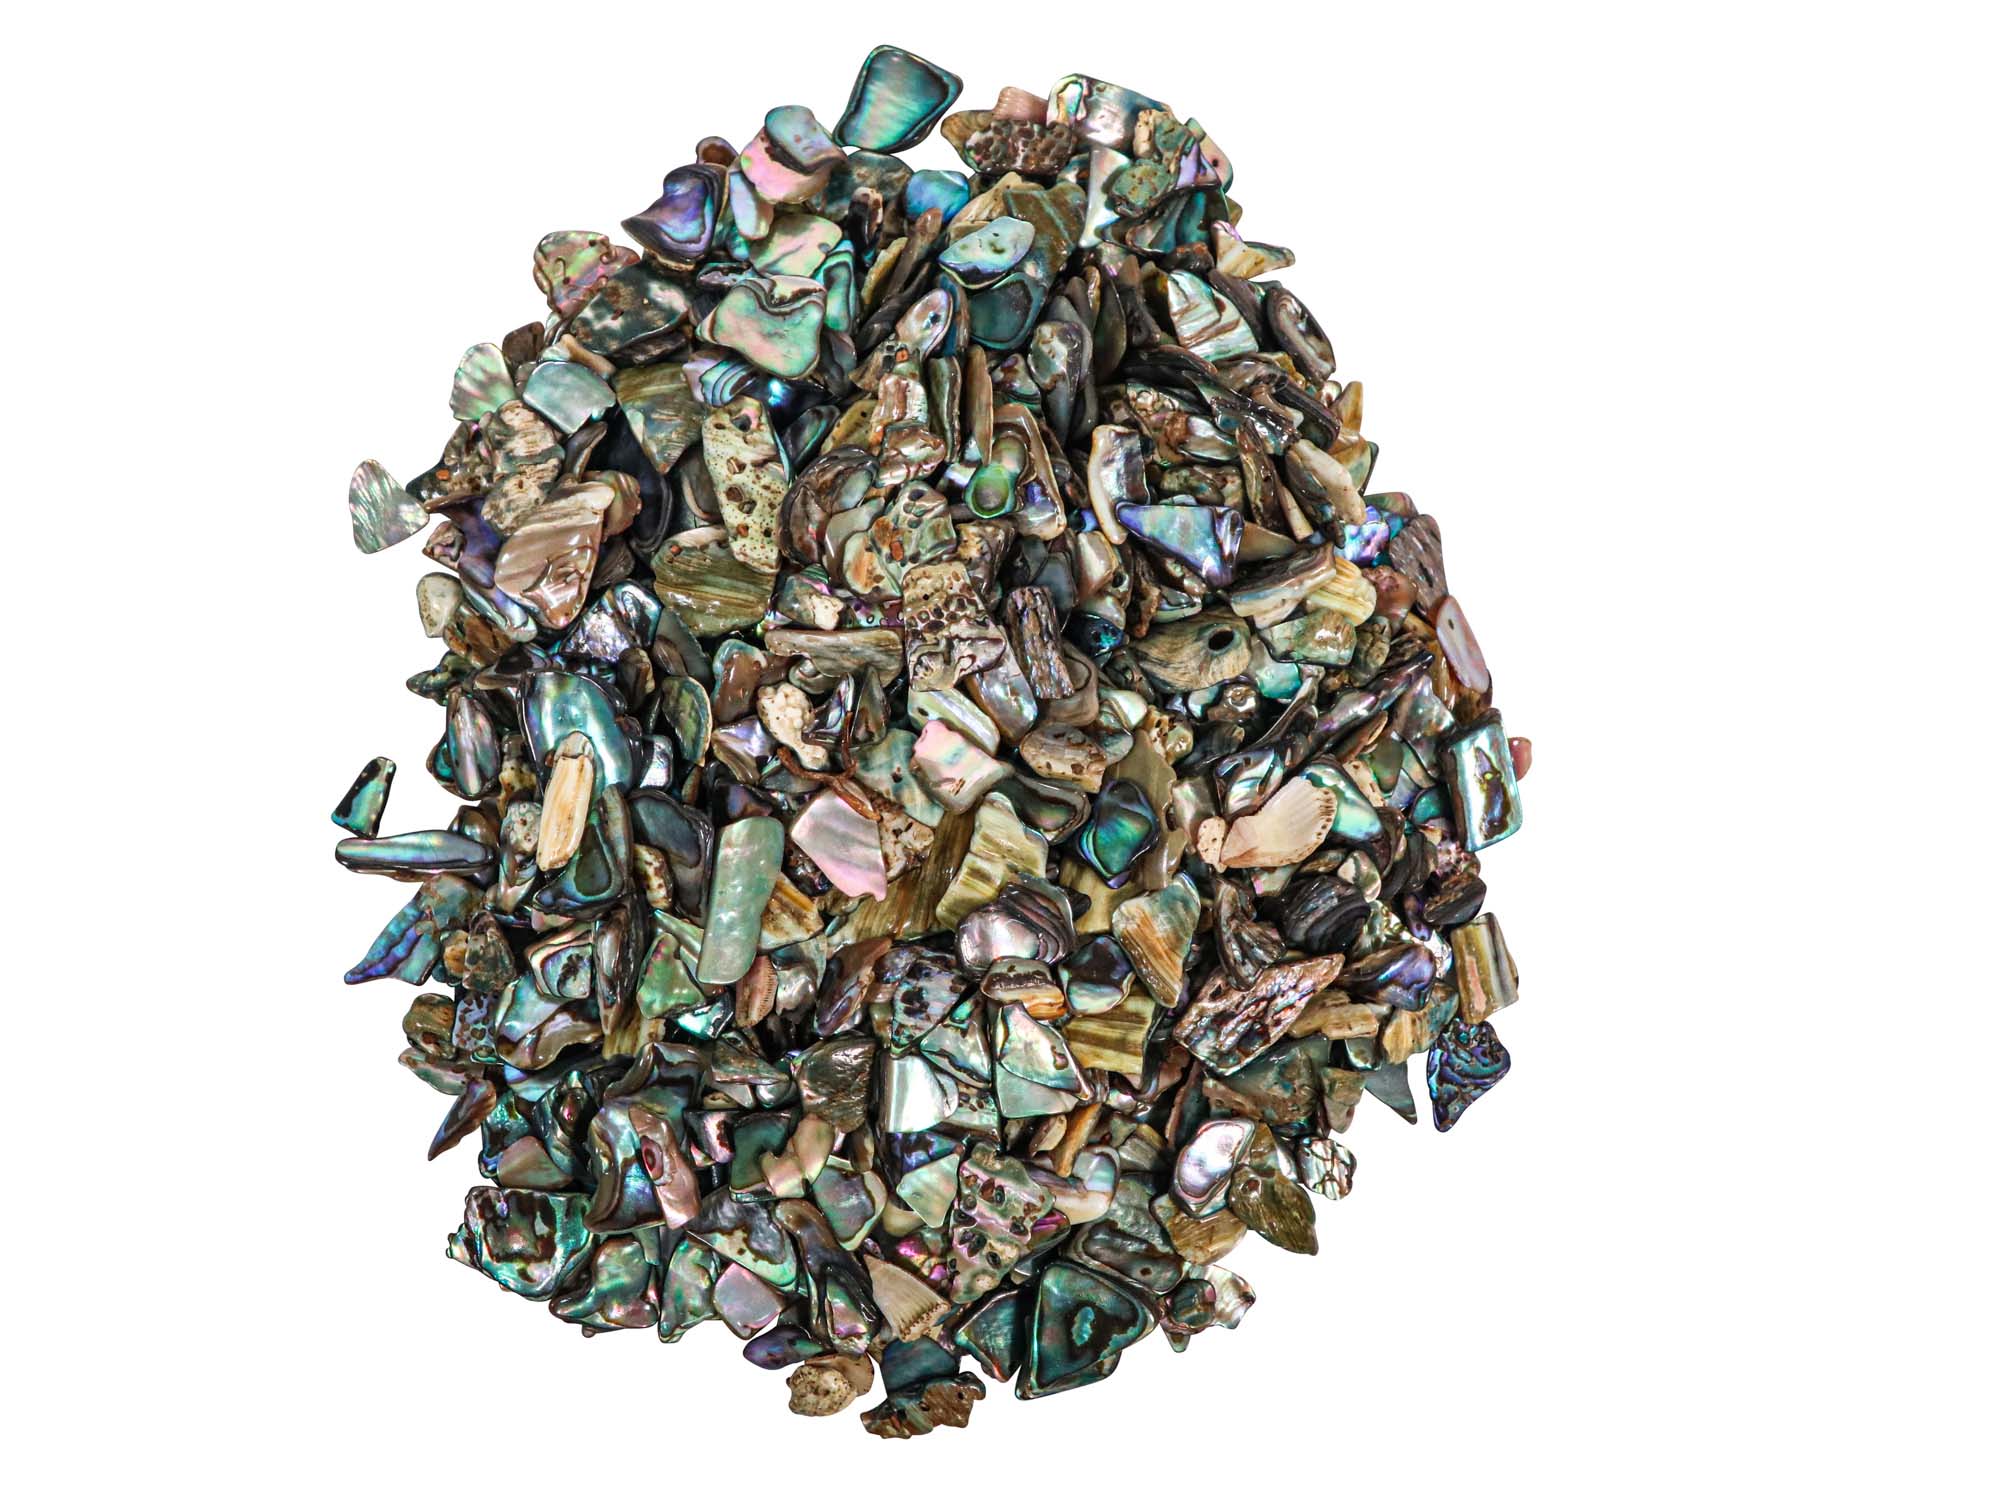 Highly Polished Paua Shell Pieces: Fine 5-15mm (1/4 lb) 